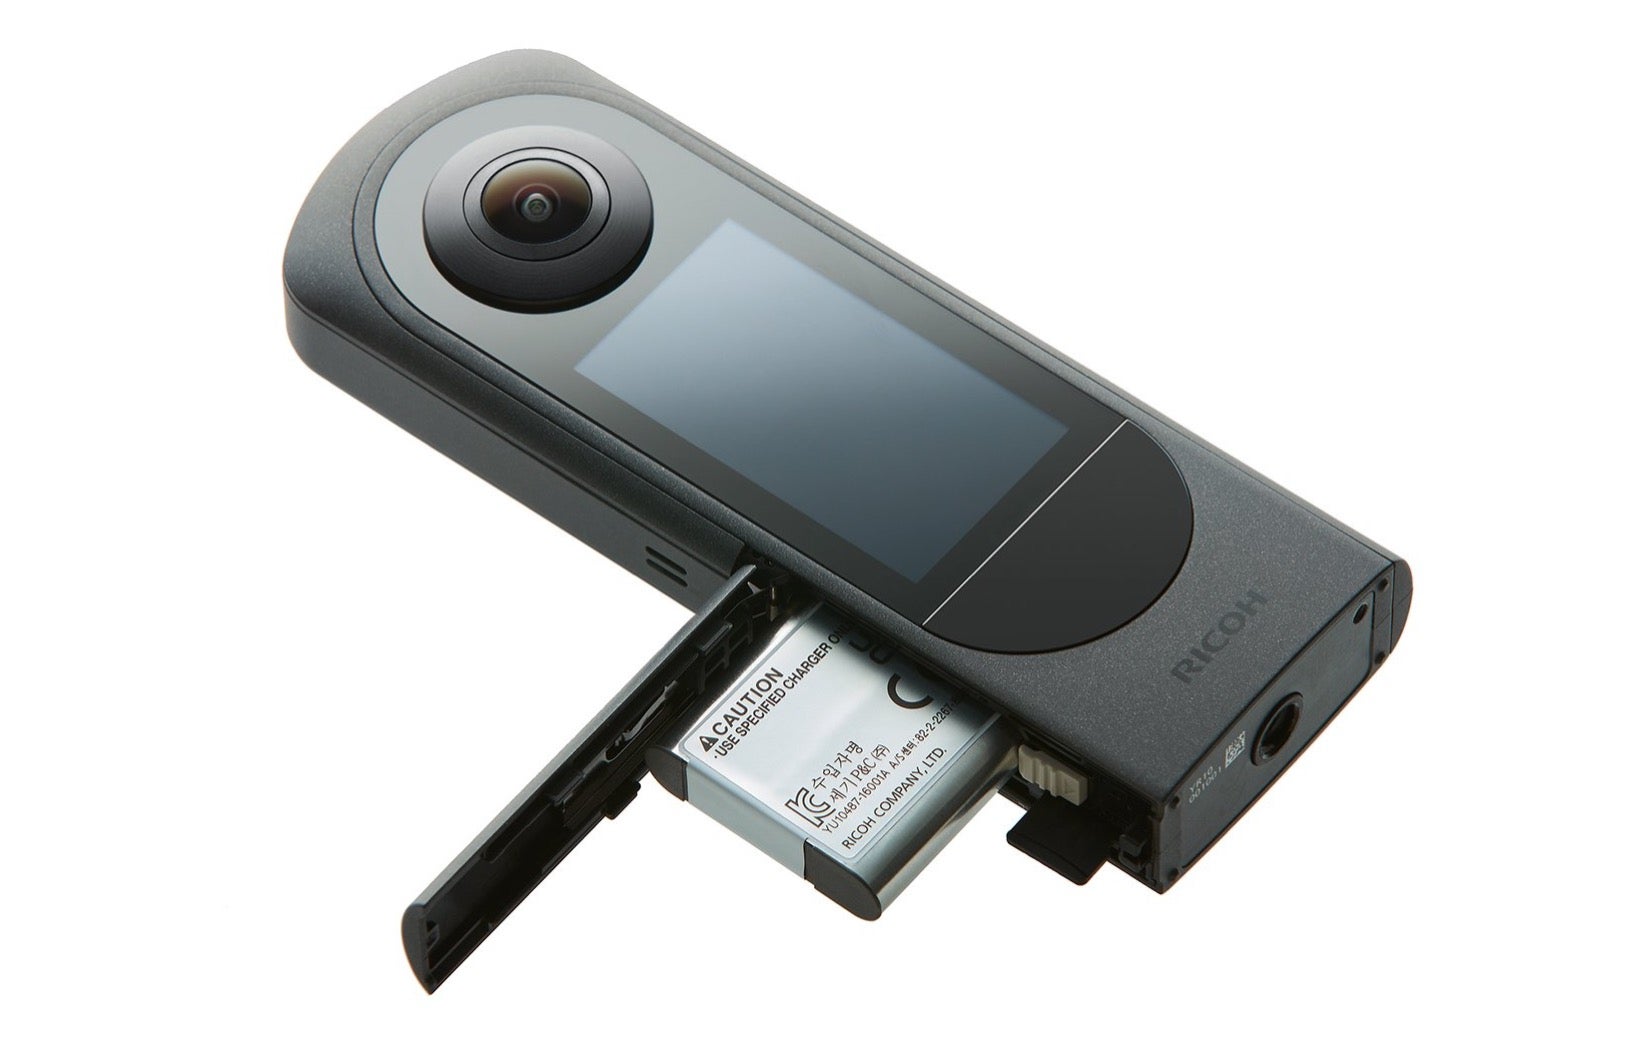 The new Ricoh Theta X has swappable batteries